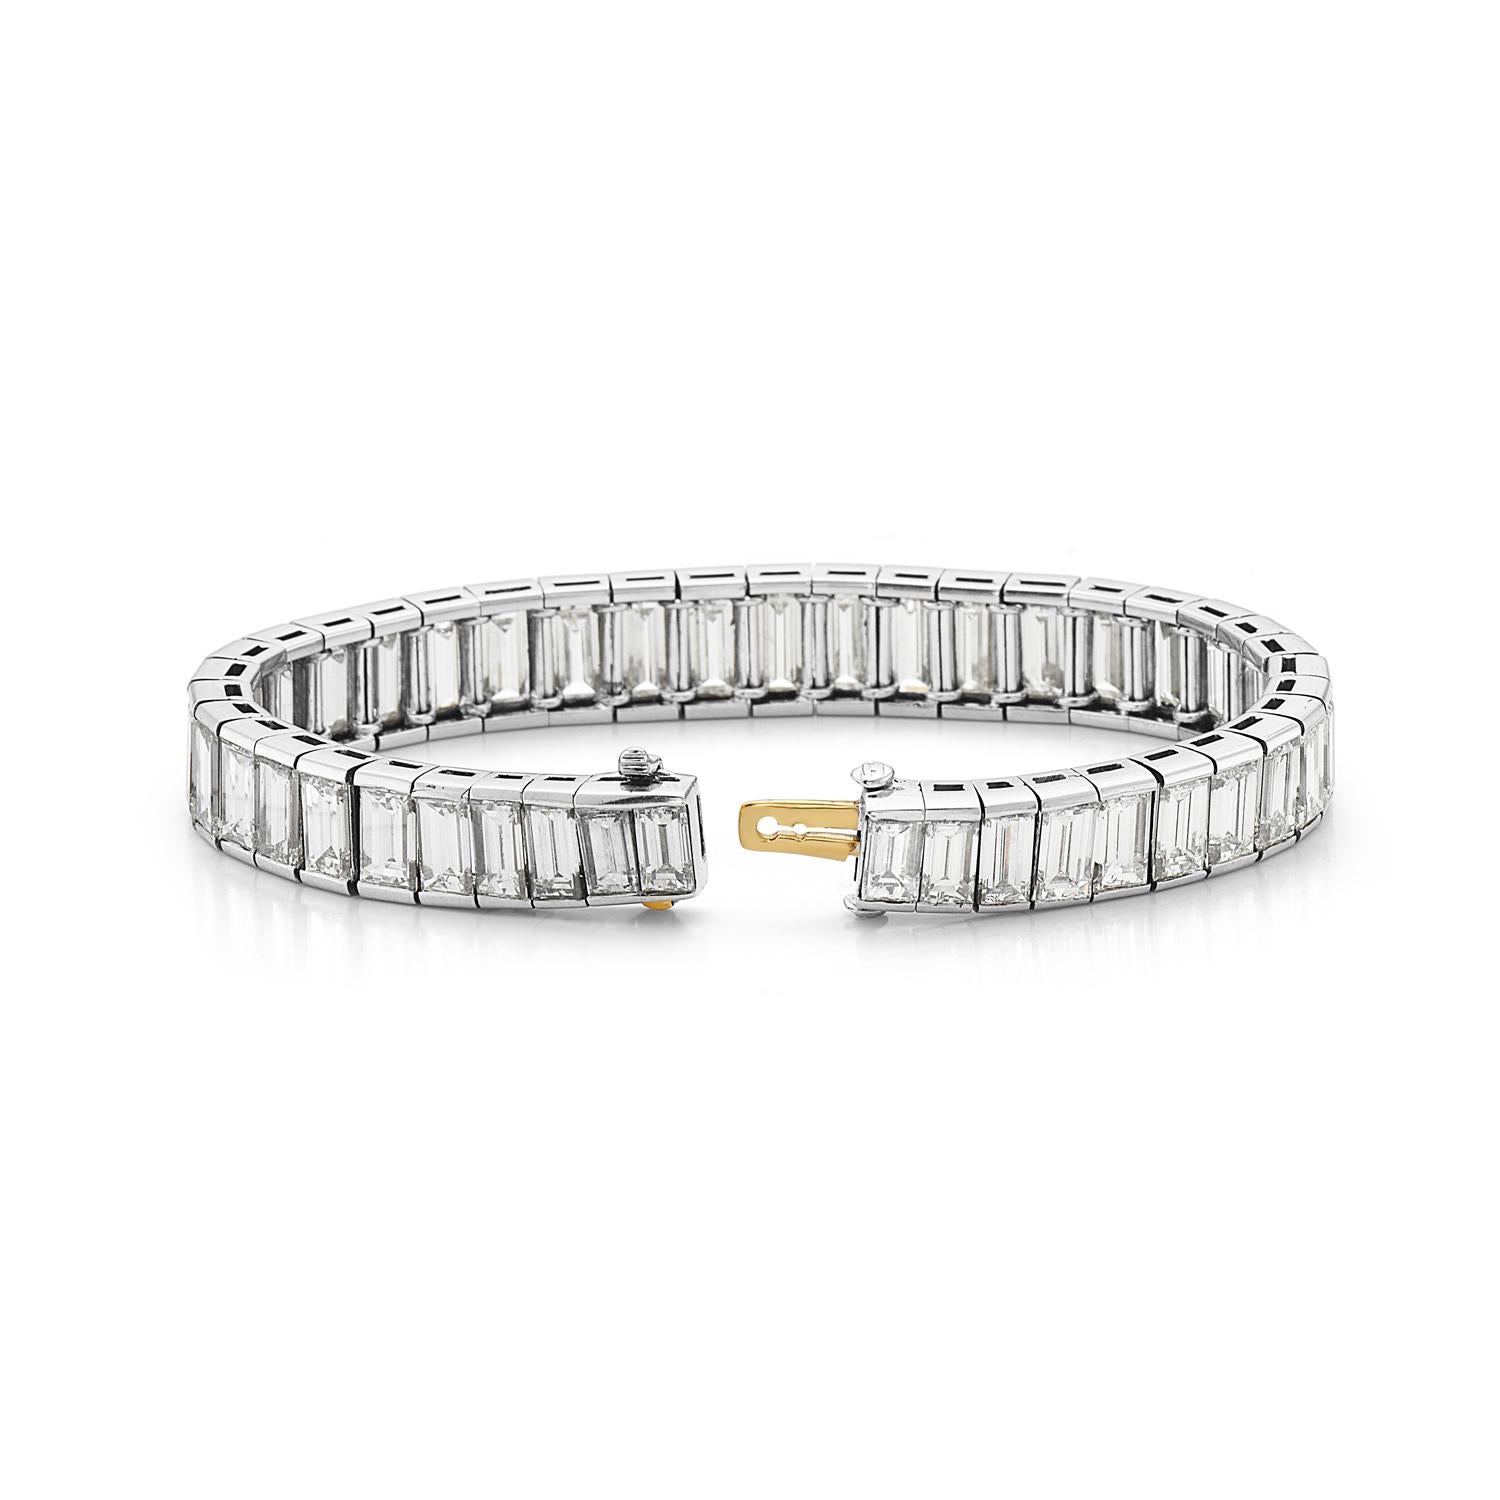 This bracelet features 38 carats of F-G VS graduated baguette cut diamonds set in platinum. This bracelet is made by the highest quality Italian craftsmans making it extremely flexible with soft delicate movements. Hidden clasp closure. 7 inch